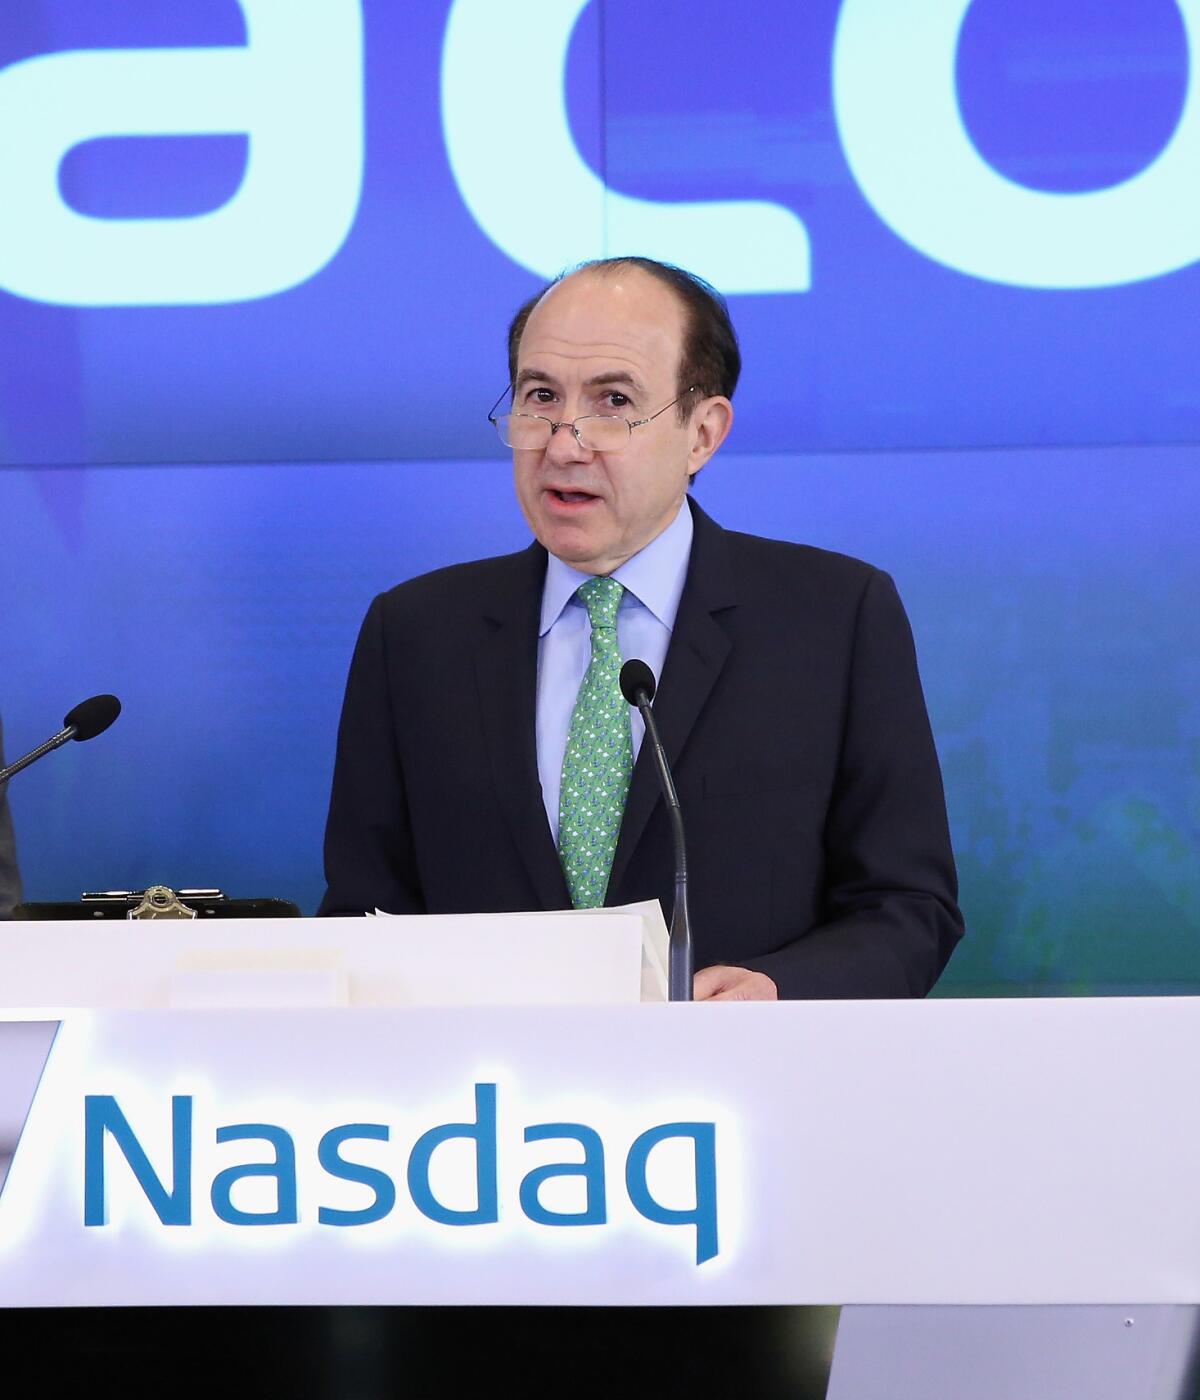 Viacom said it has acquired a 50% stake in Prism TV, an Indian TV group. Viacom CEO Philippe Dauman is shown ringing the NASDAQ opening bell in June.